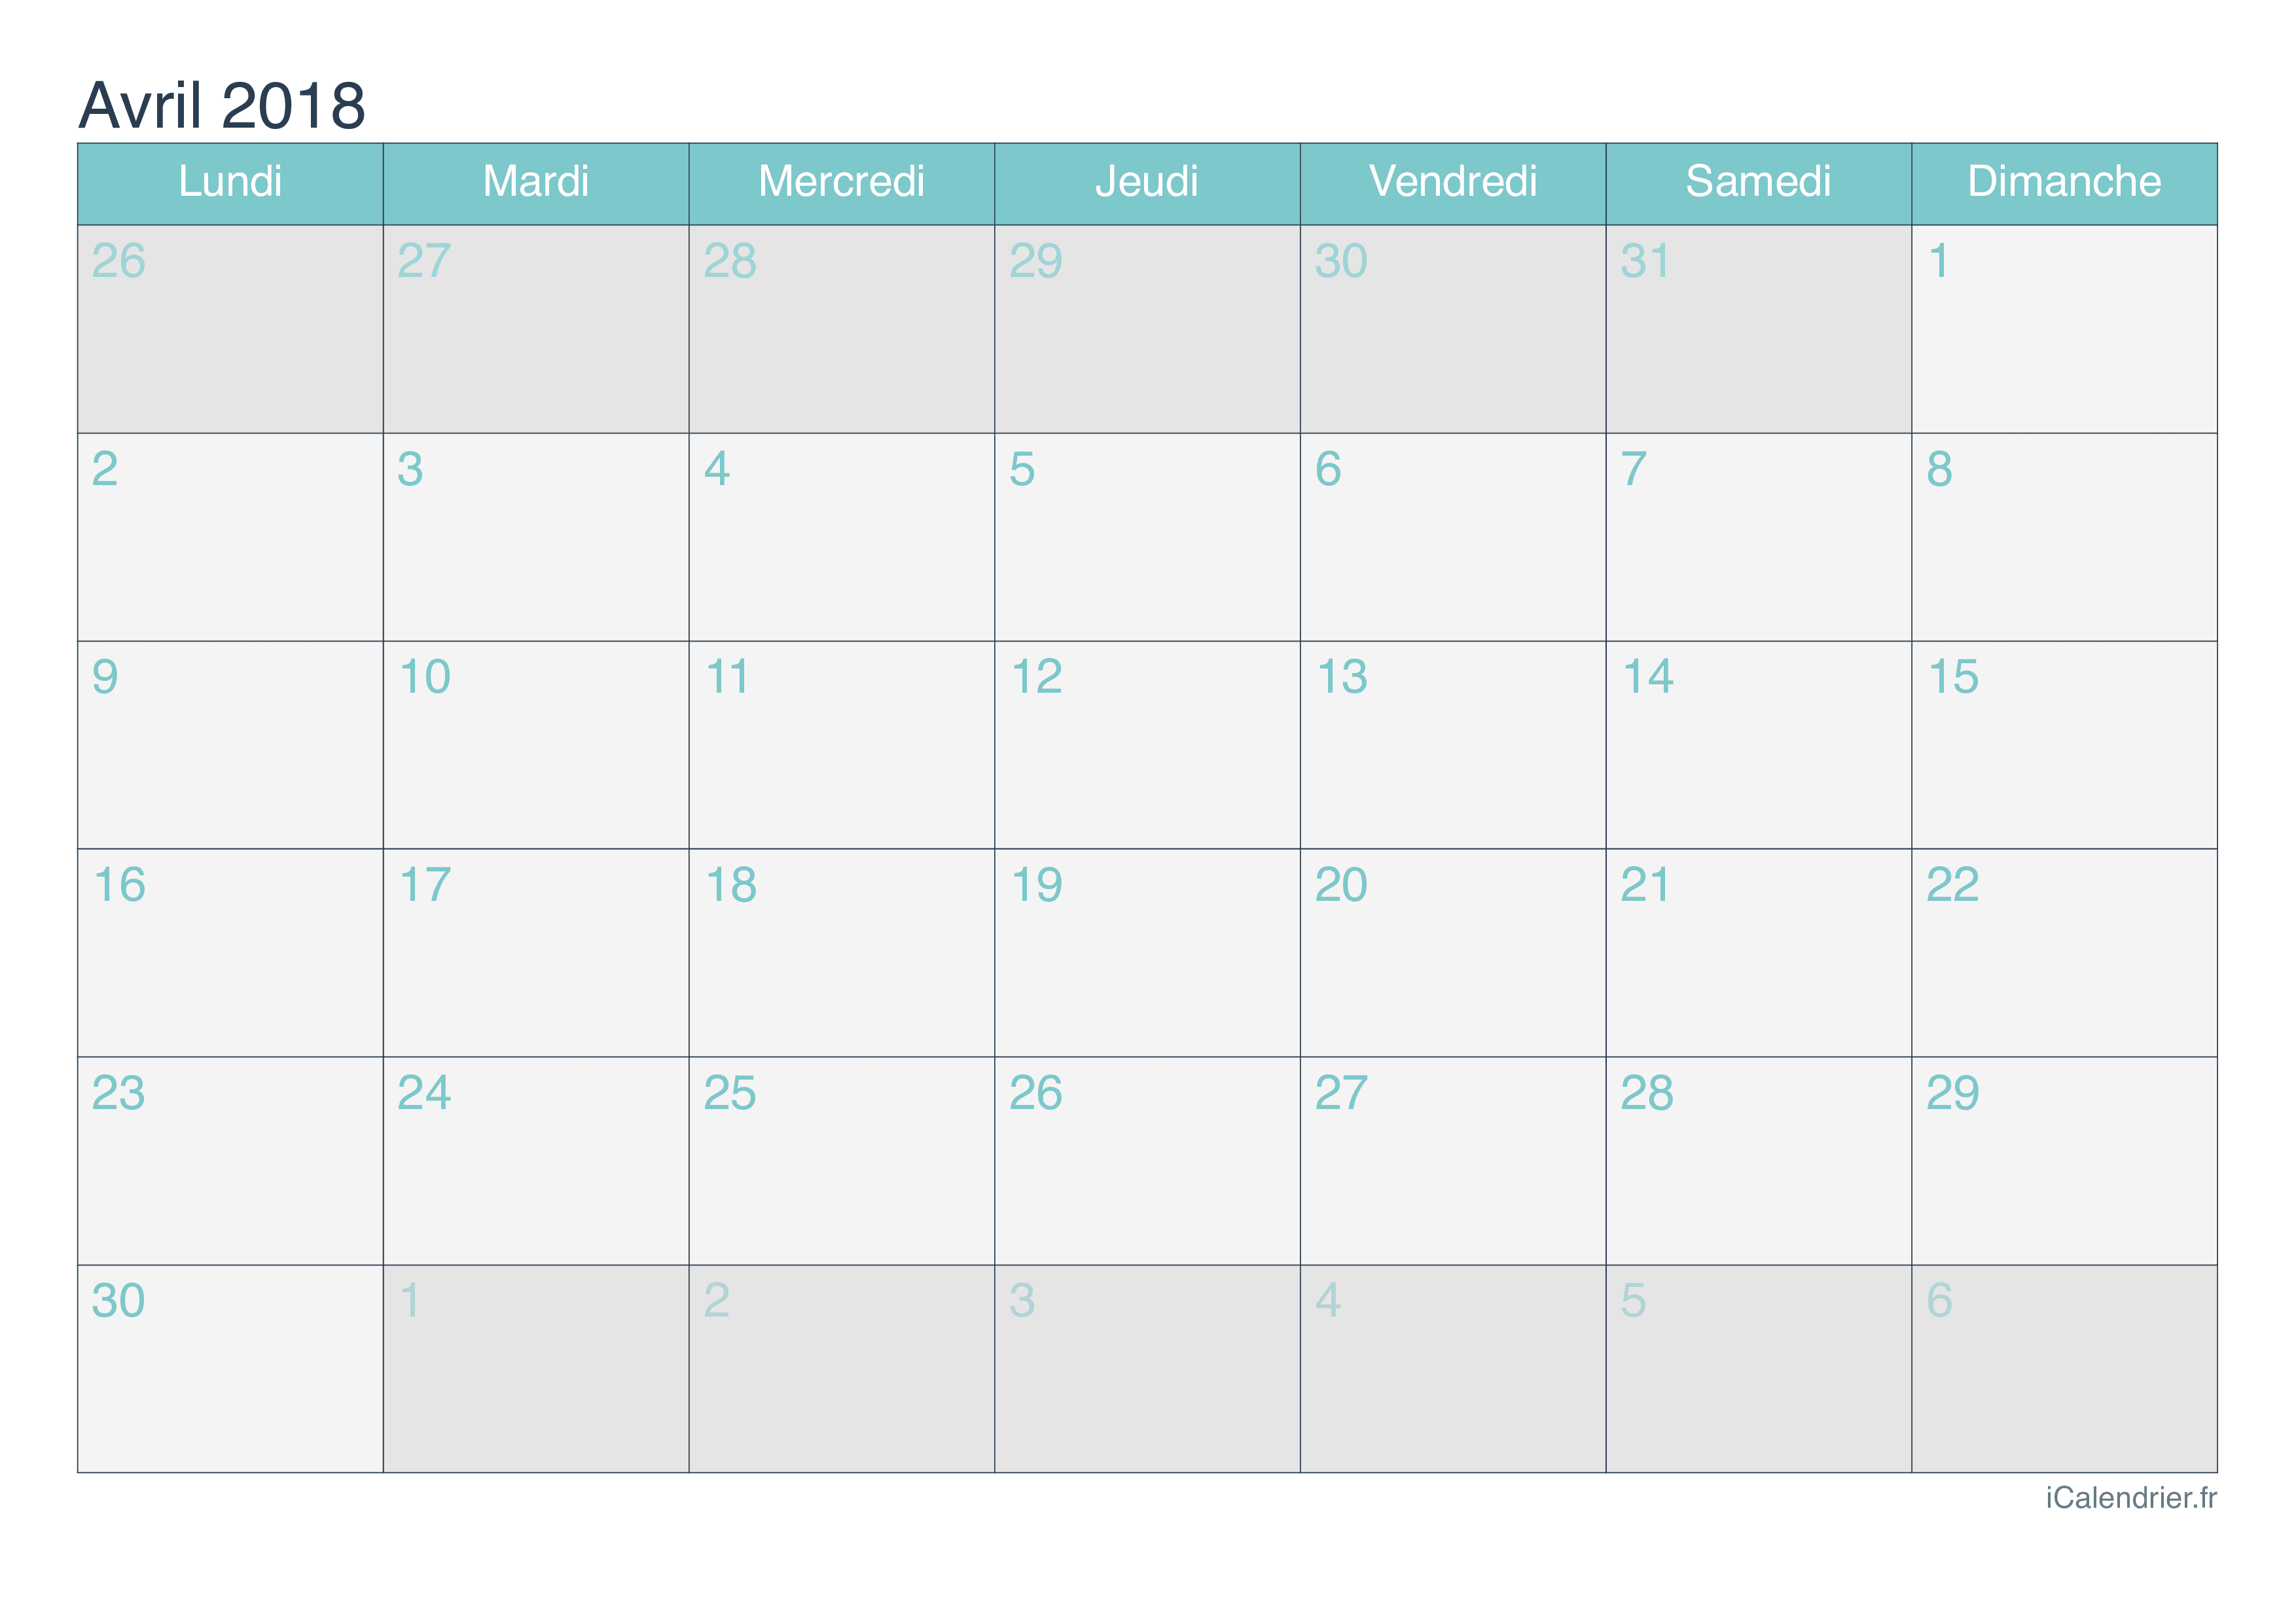 Calendrier d'avril 2018 - Turquoise